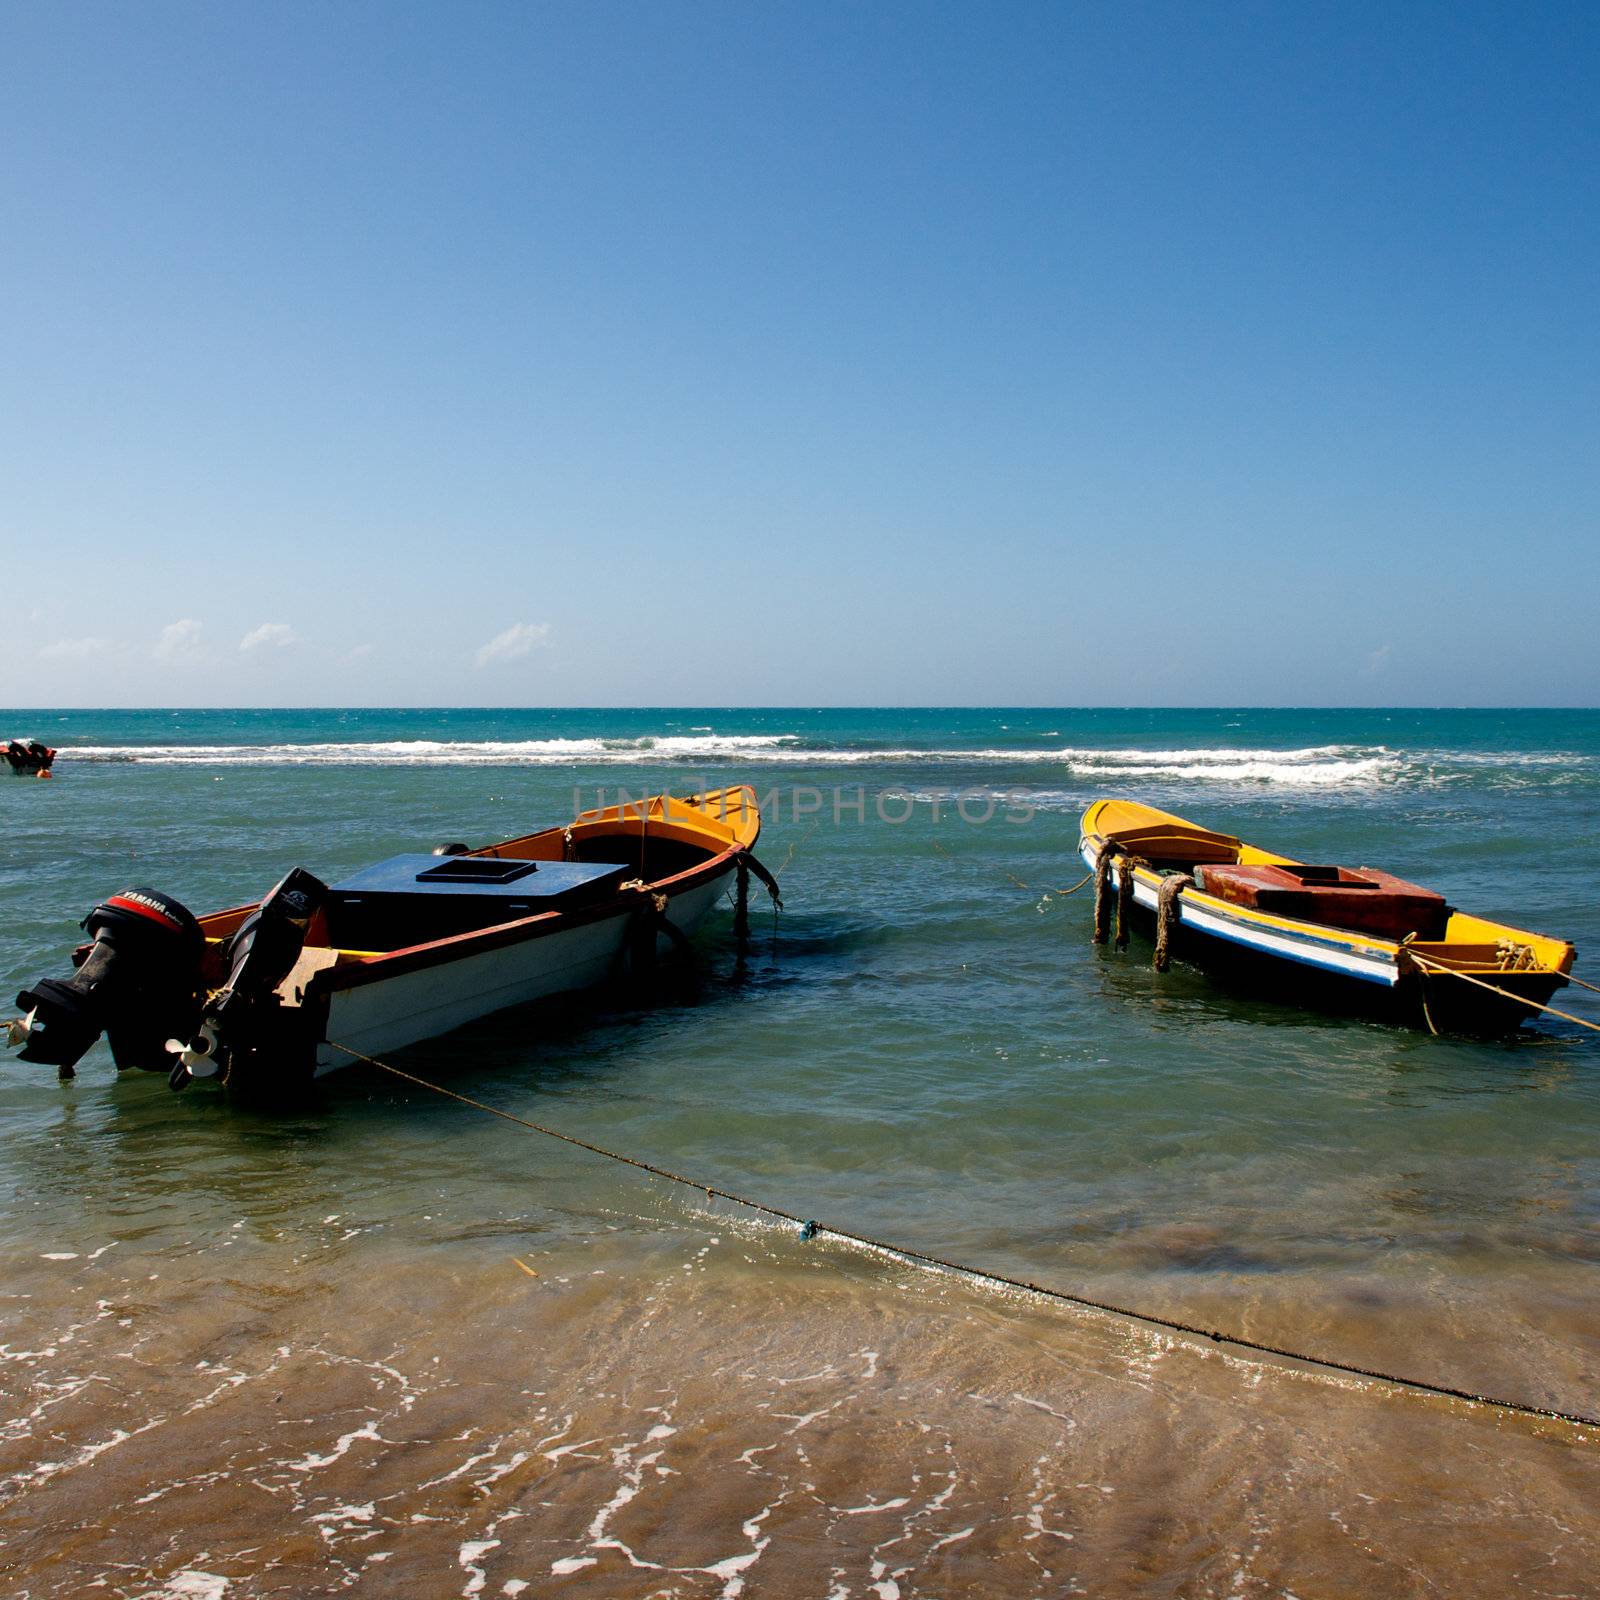 Colorful Boats on the island of Jamaica in the caribbean